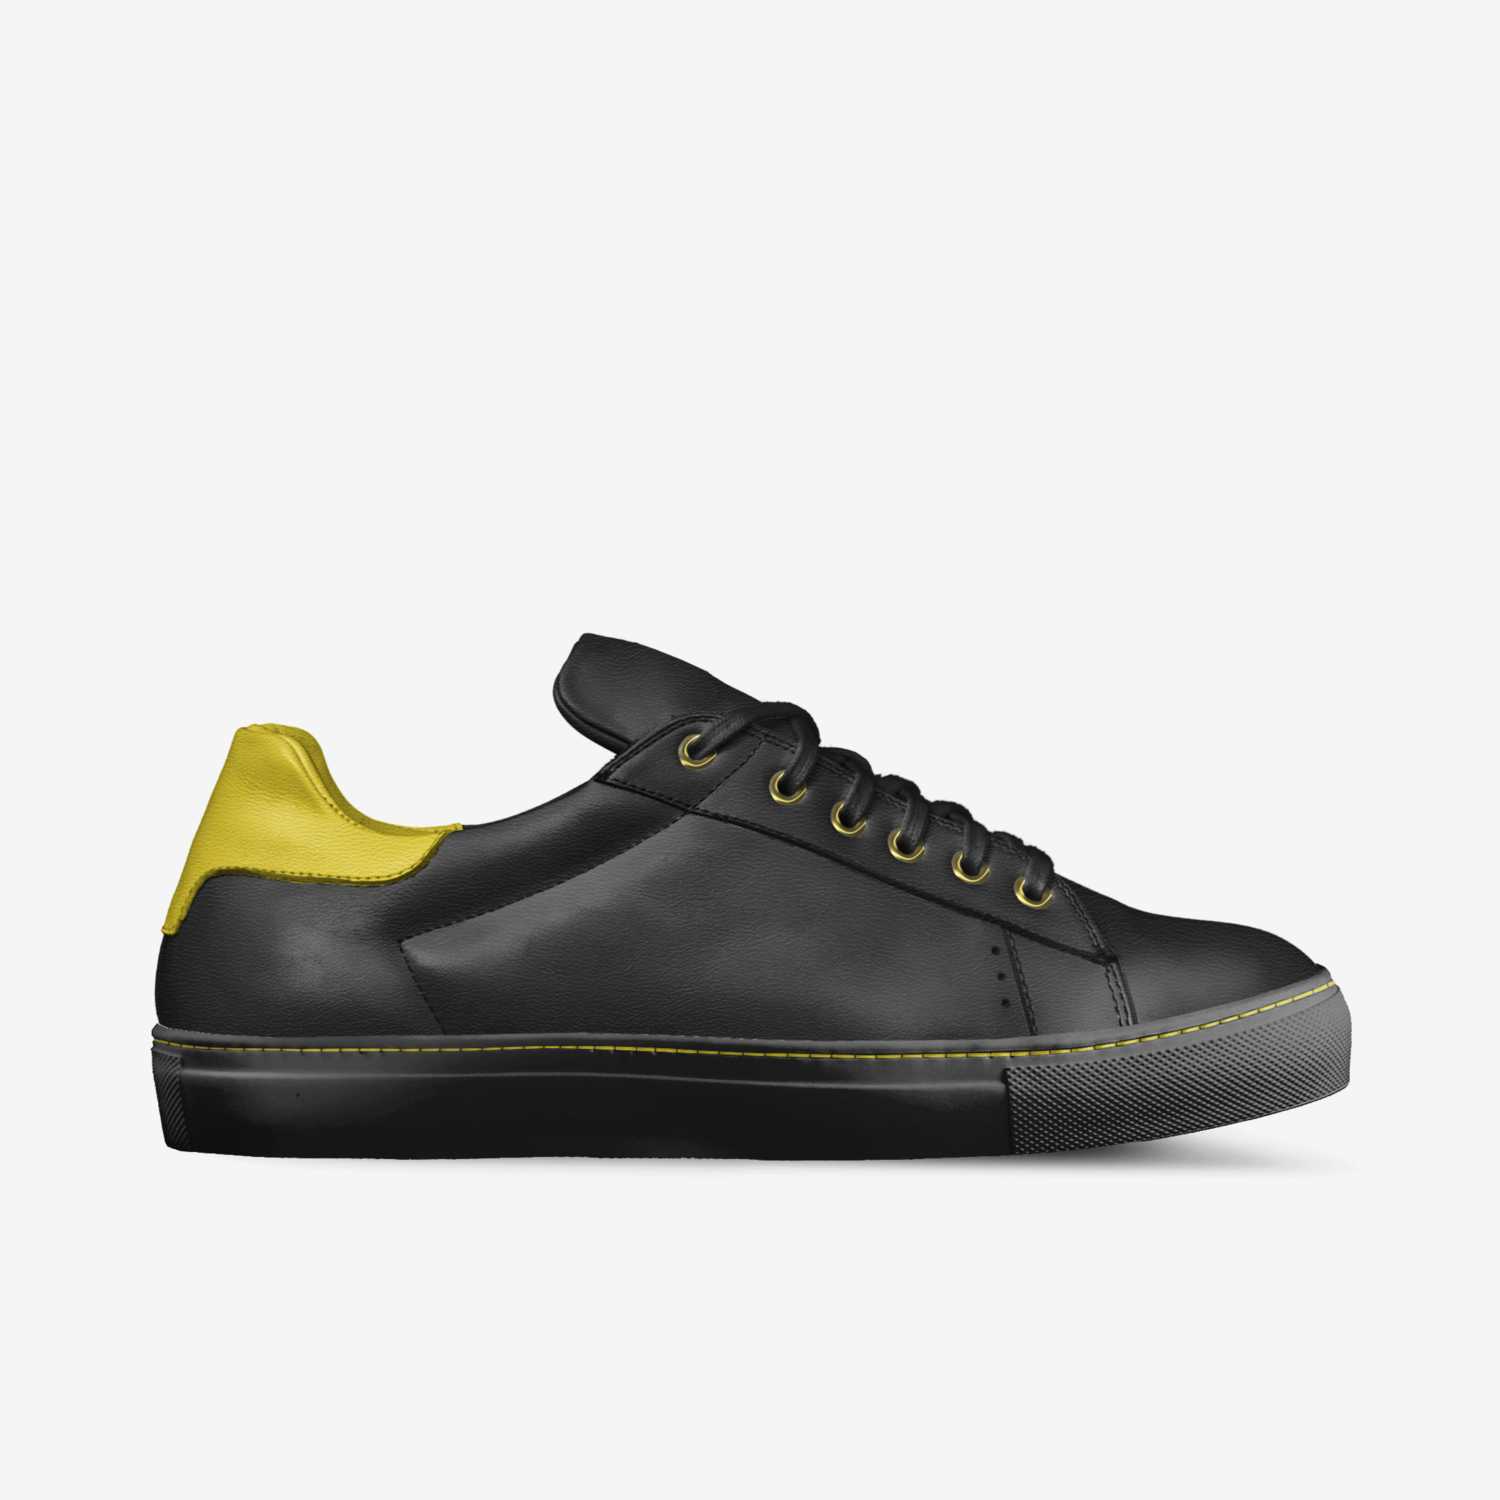 Jefe Gold Standard custom made in Italy shoes by Leonard | Side view